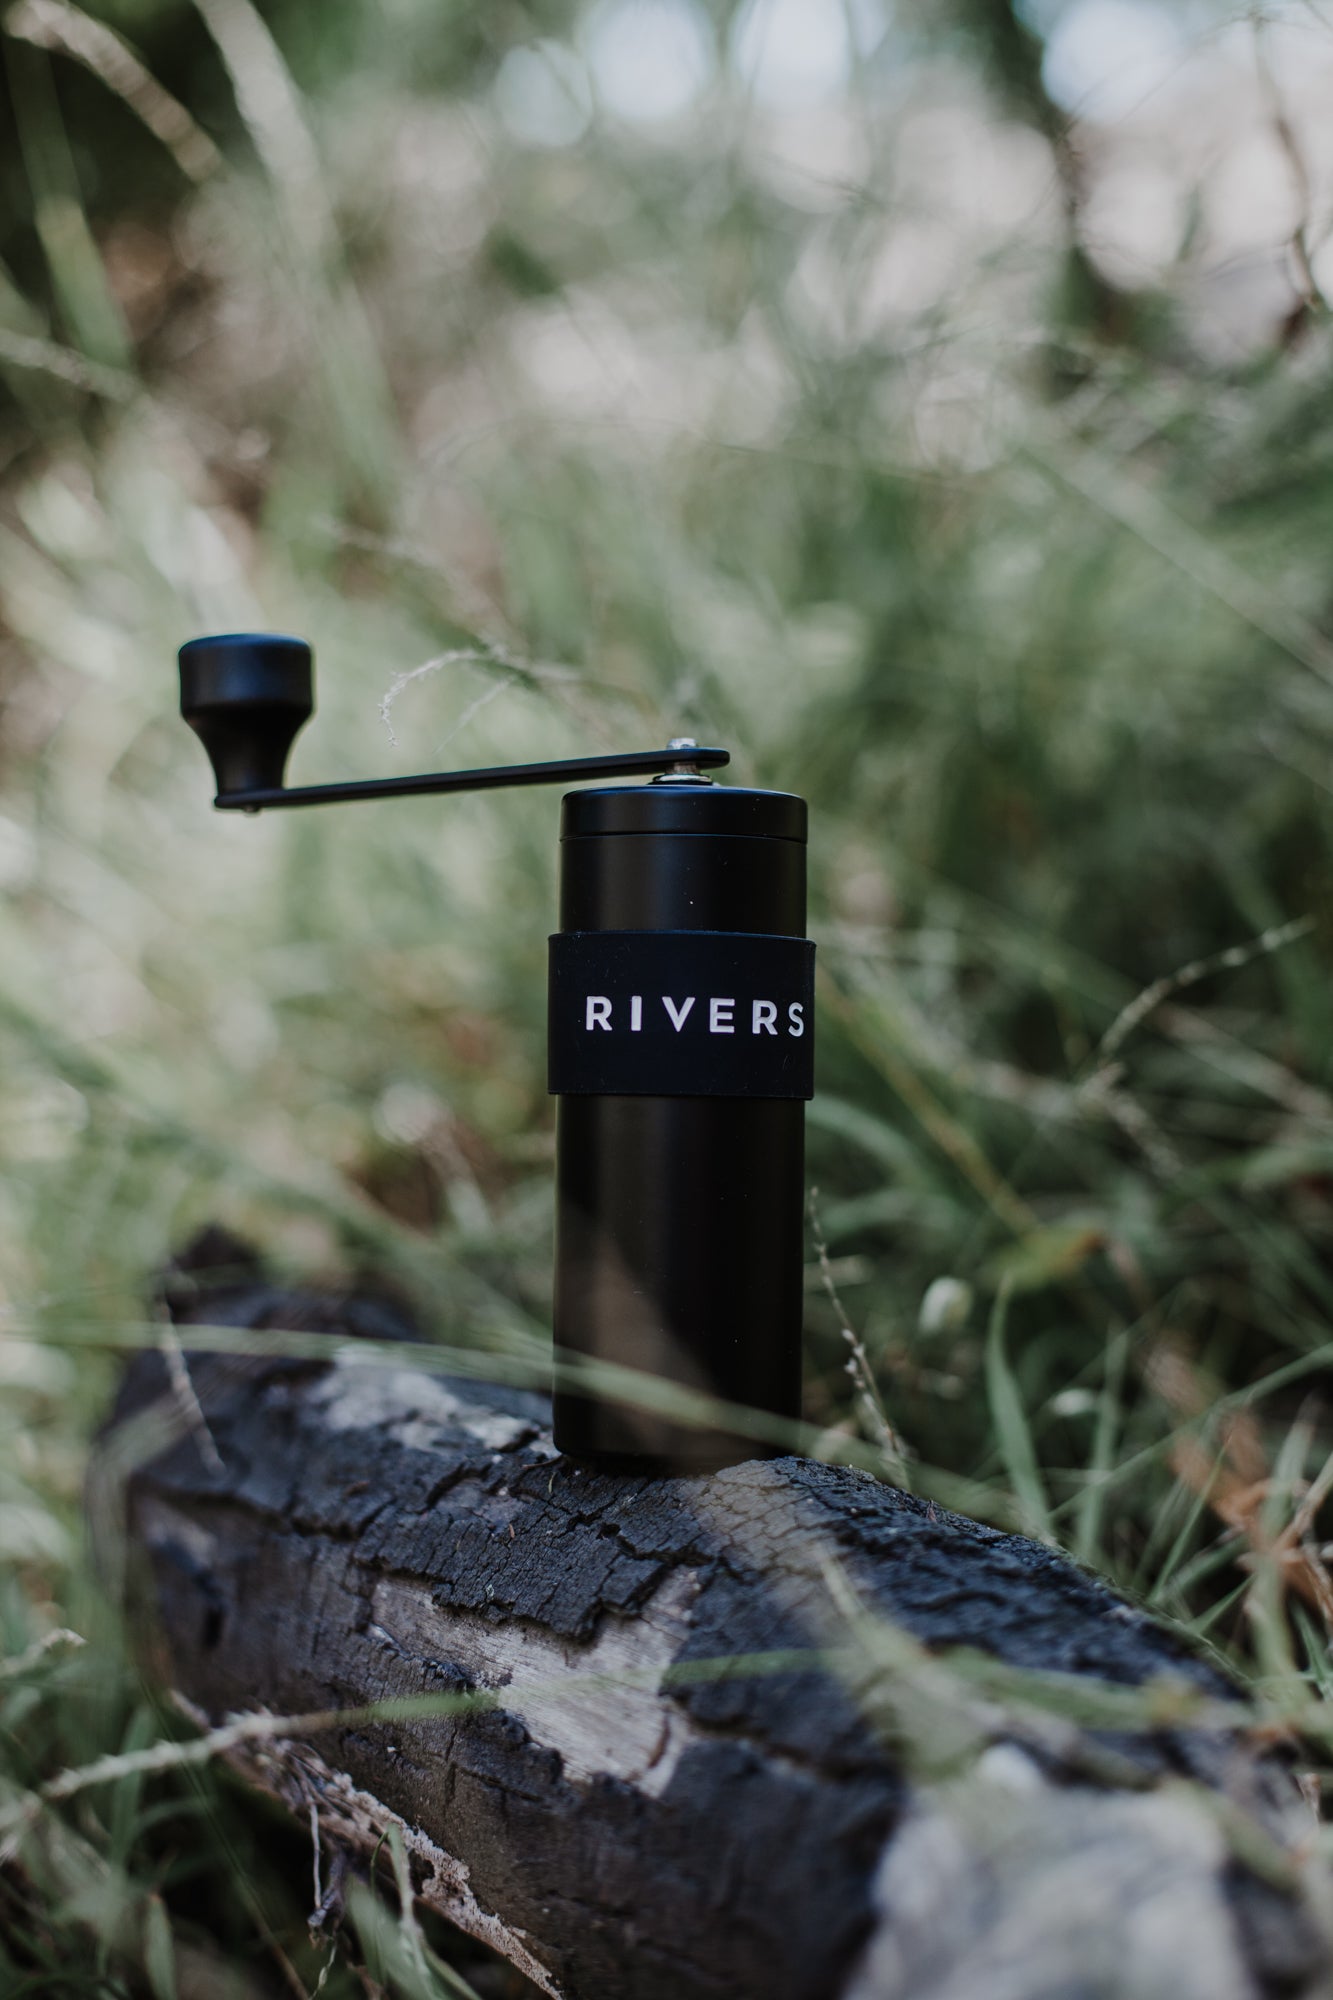 RIVERS x Thieves Filter Beans Coffee Box